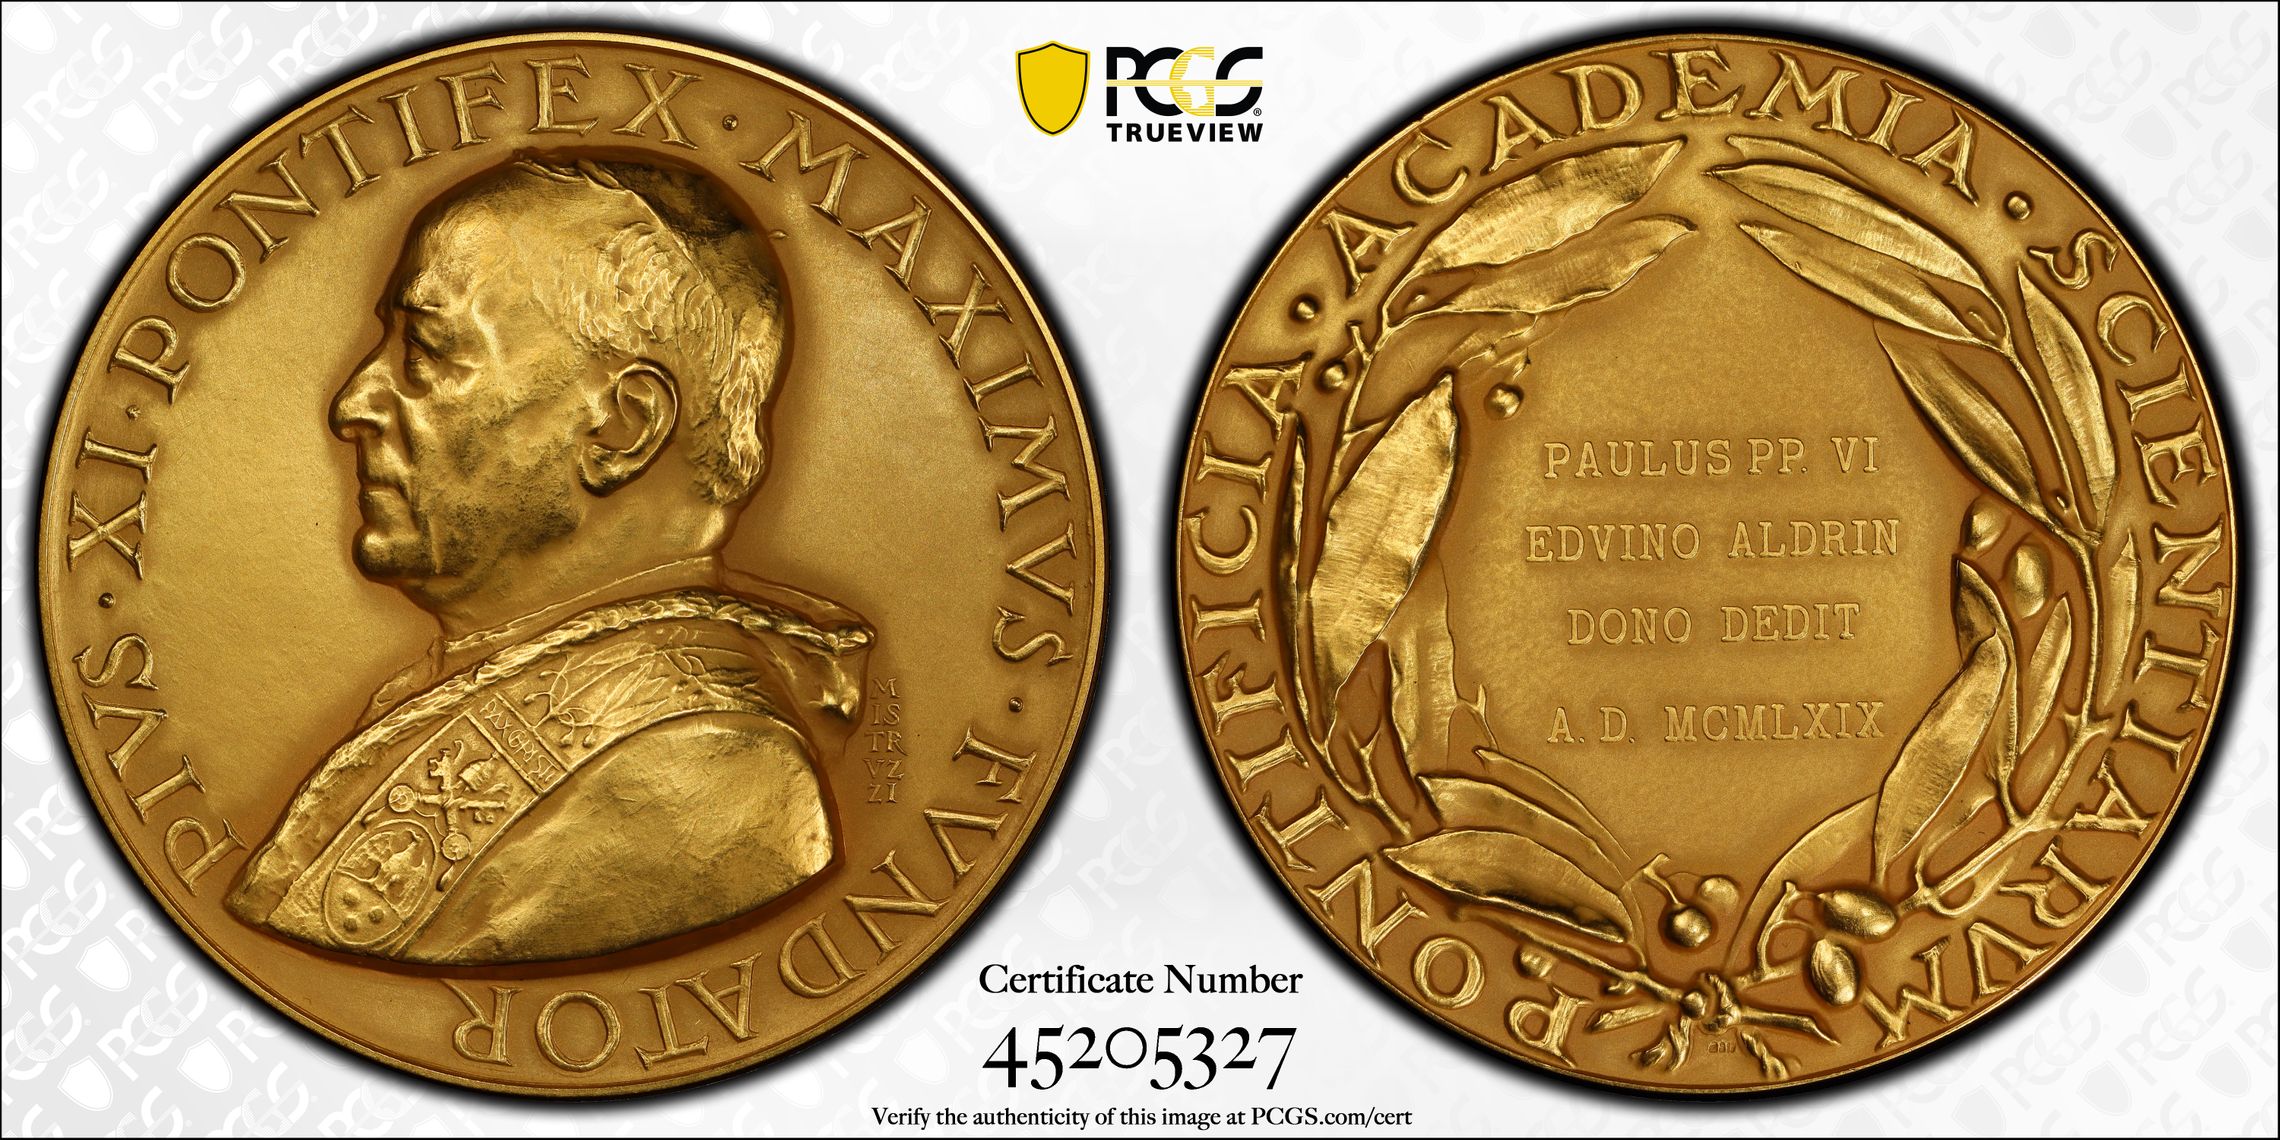 G084 Very rare 1969 Vatican gold Medal from Pope Paul VI. PCGS S